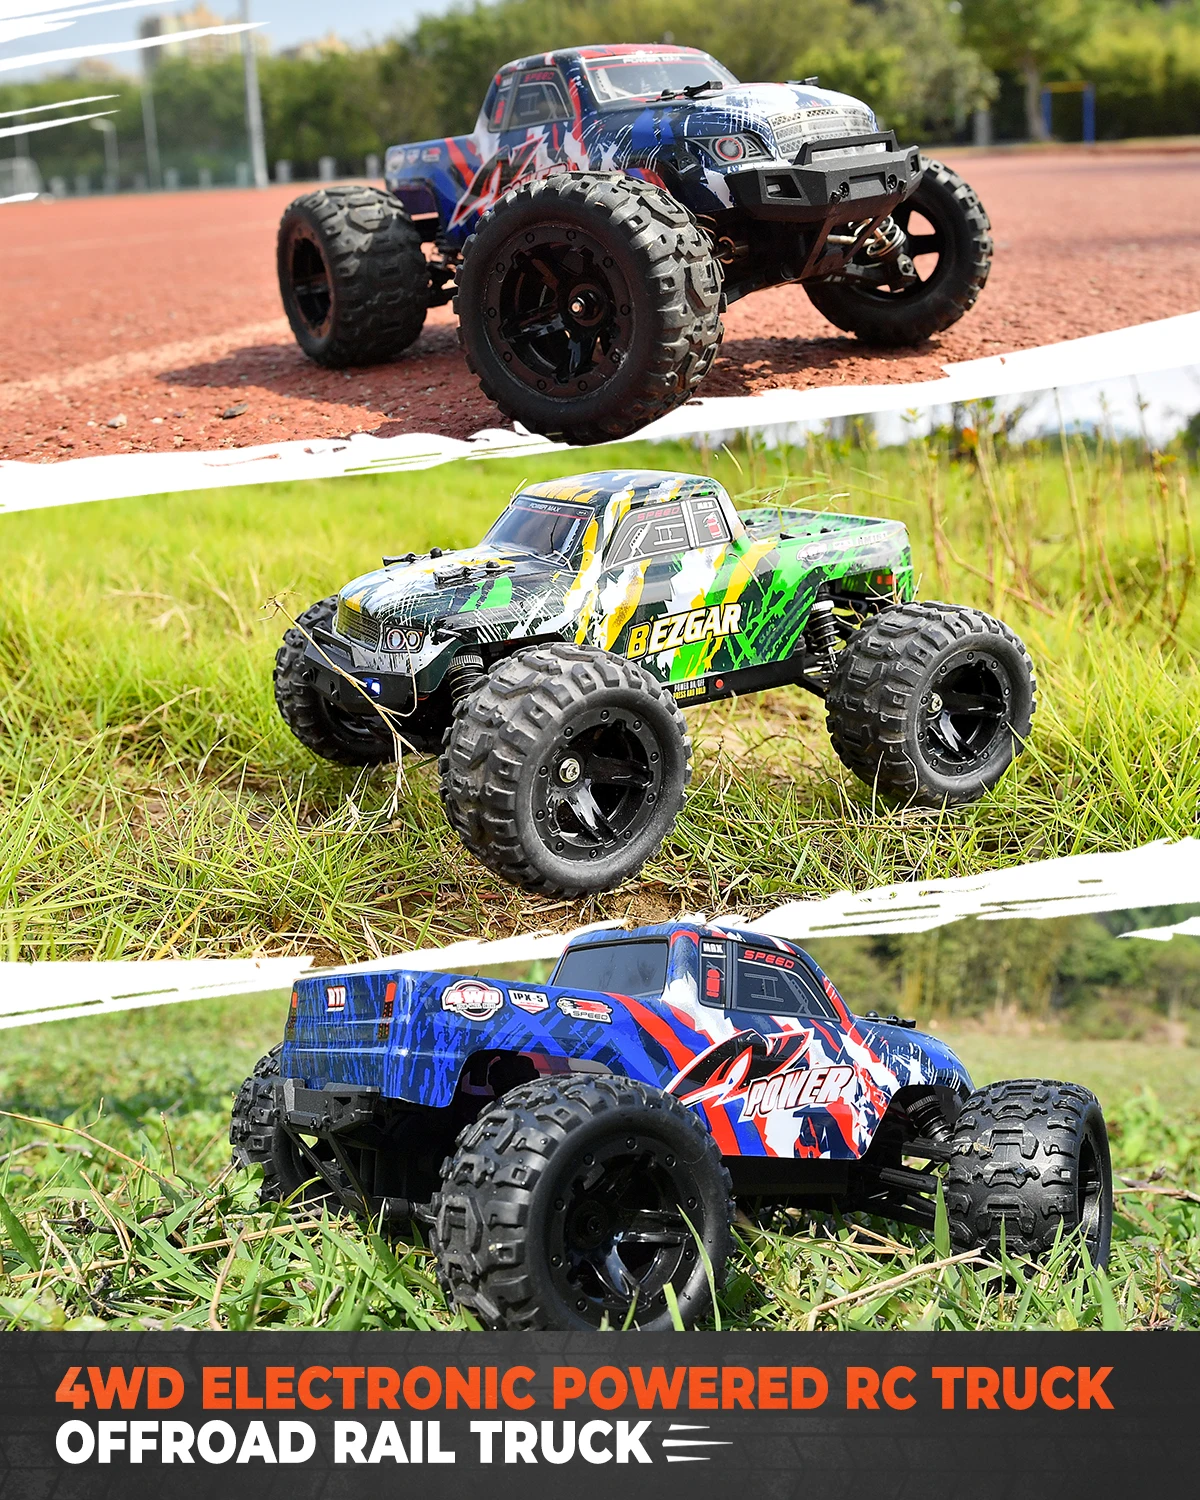 BEZGAR HM161 Hobby RC Car 1:16 All-Terrain 40Km/h Off-Road 4WD Remote Control Monster Truck Crawler with Battery for Kids Adults 4